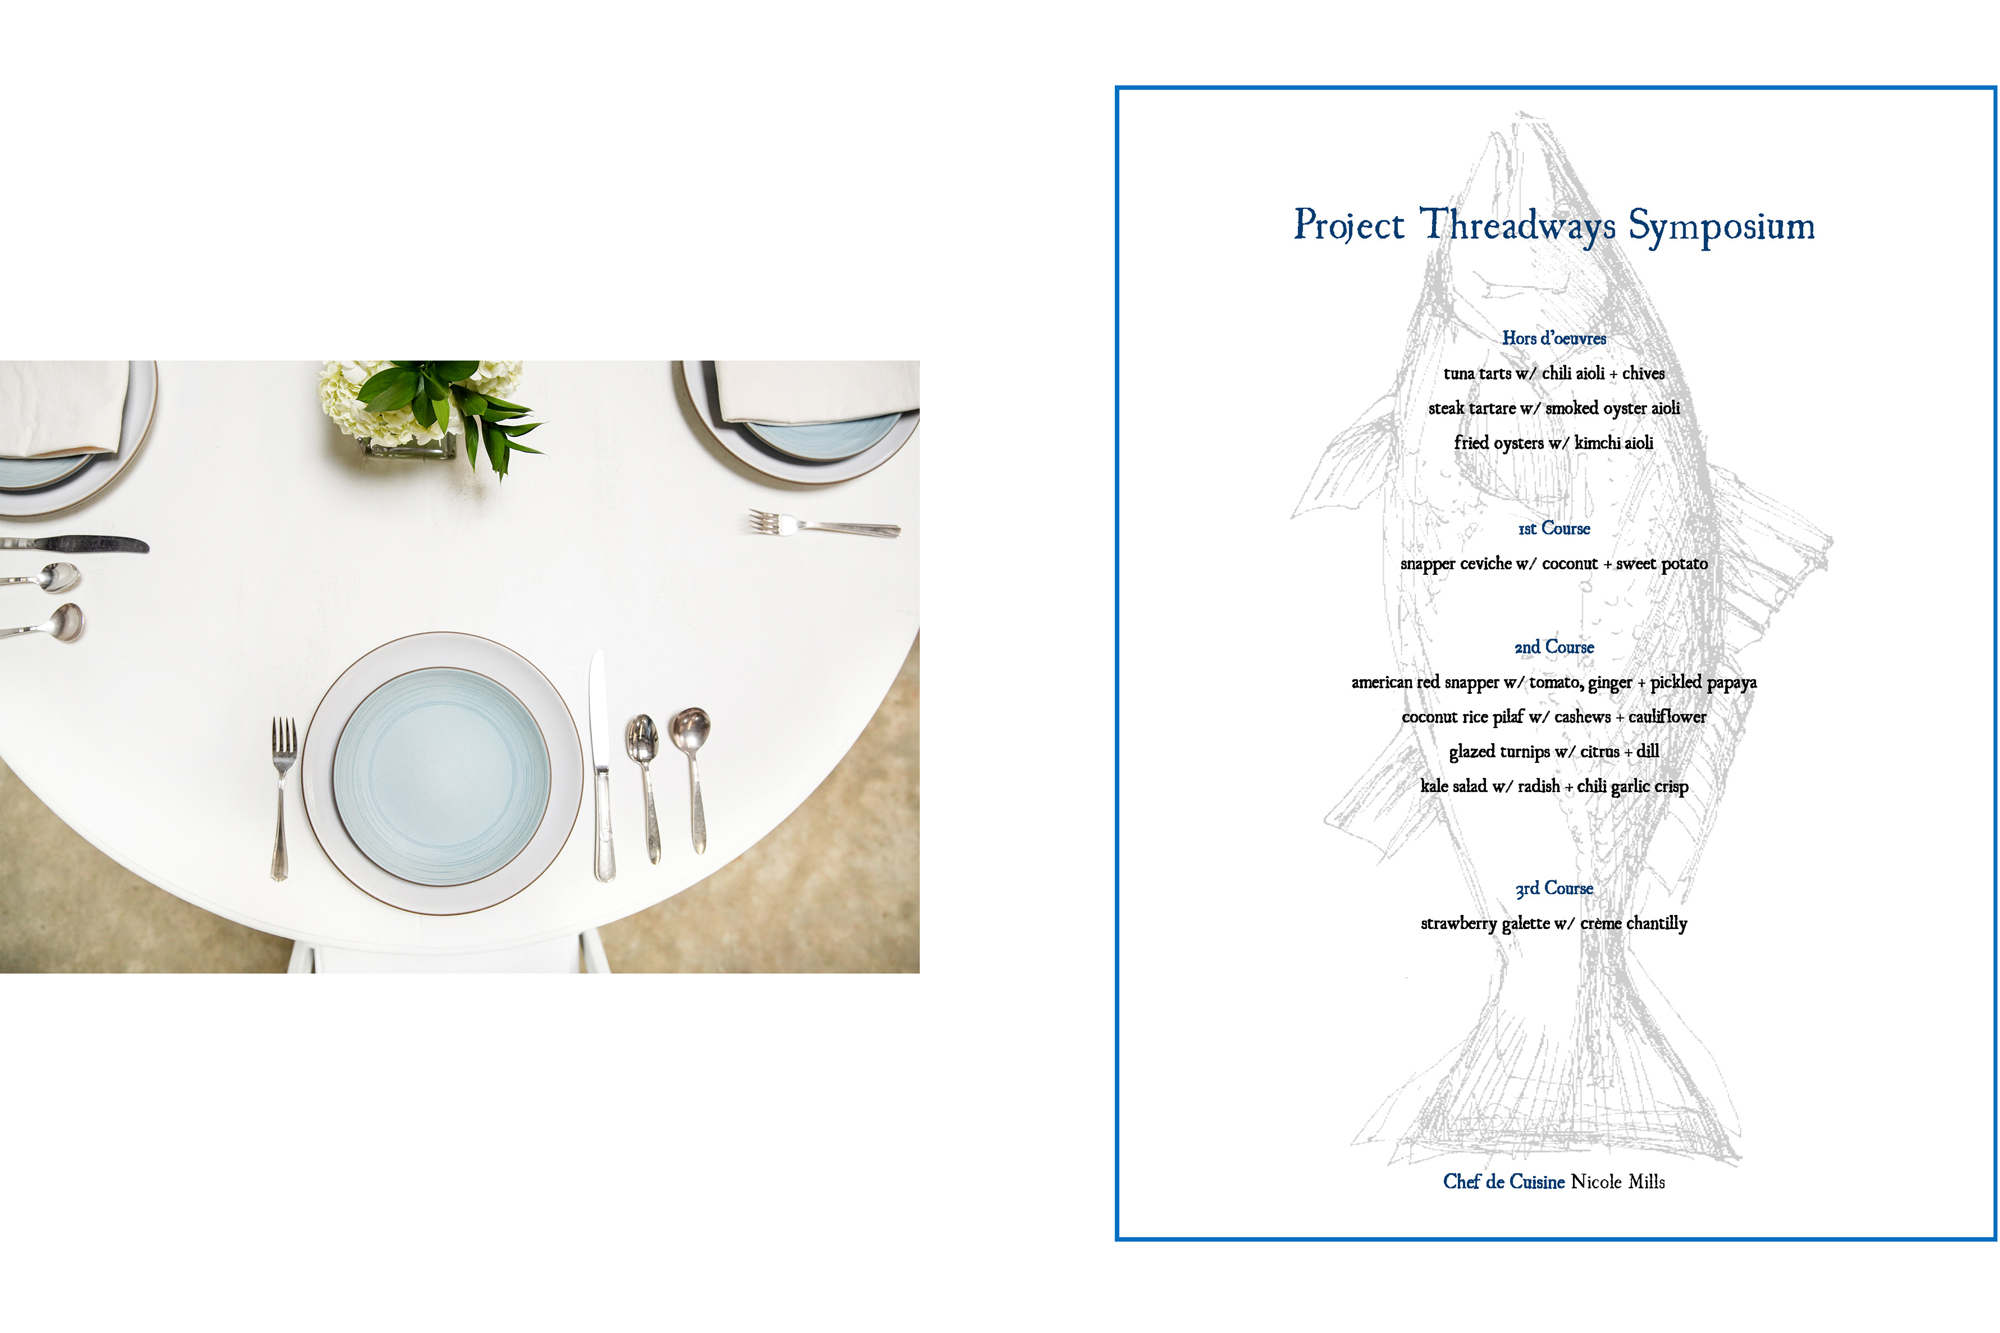 Table setting with blue and white plates along with an image of a dinner menu.